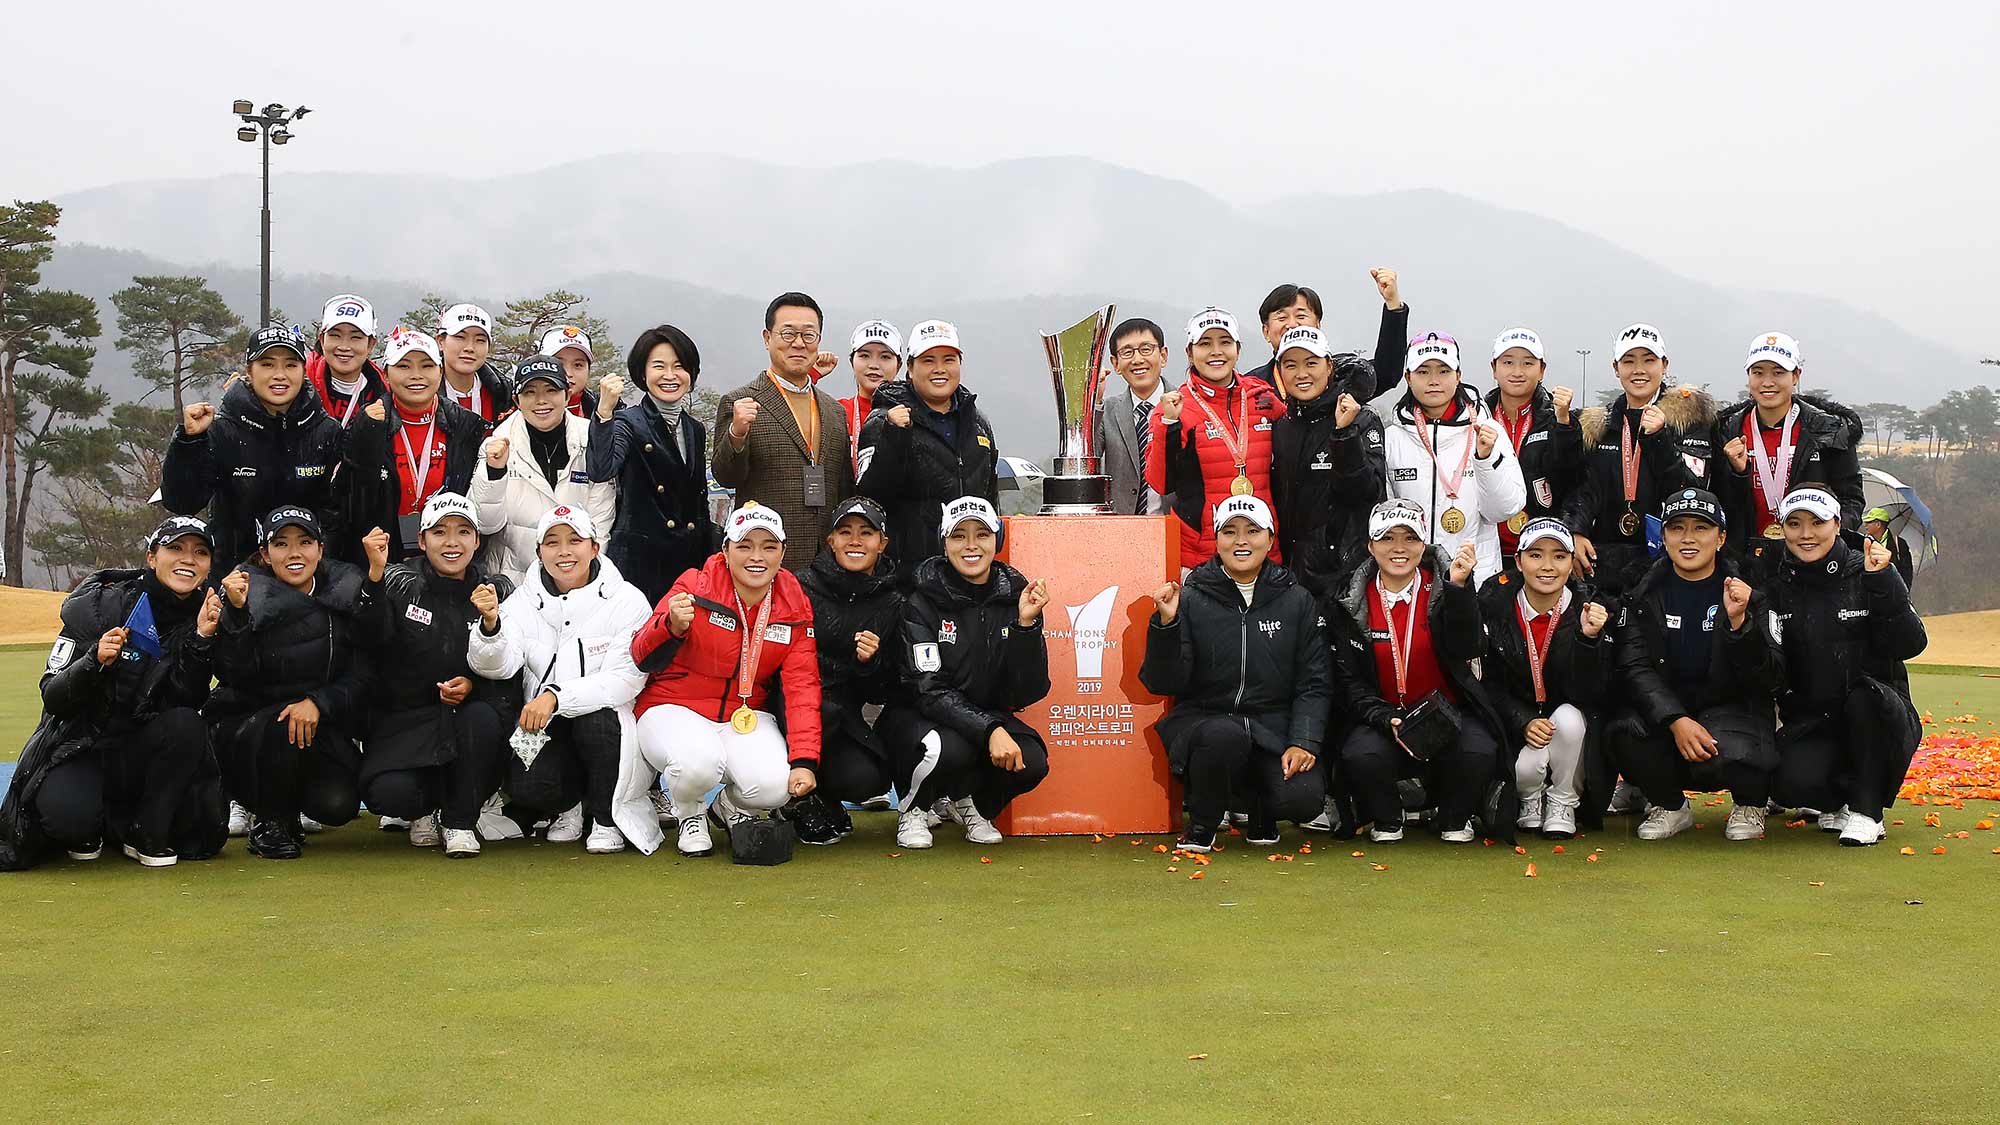 Teams from the LPGA and KLPGA pose after the KLPGA won the 2019 Orange Life Champions Trophy Inbee Park Invitational at Blue One The Honors Country Club in Gyeongju, Republic of Korea